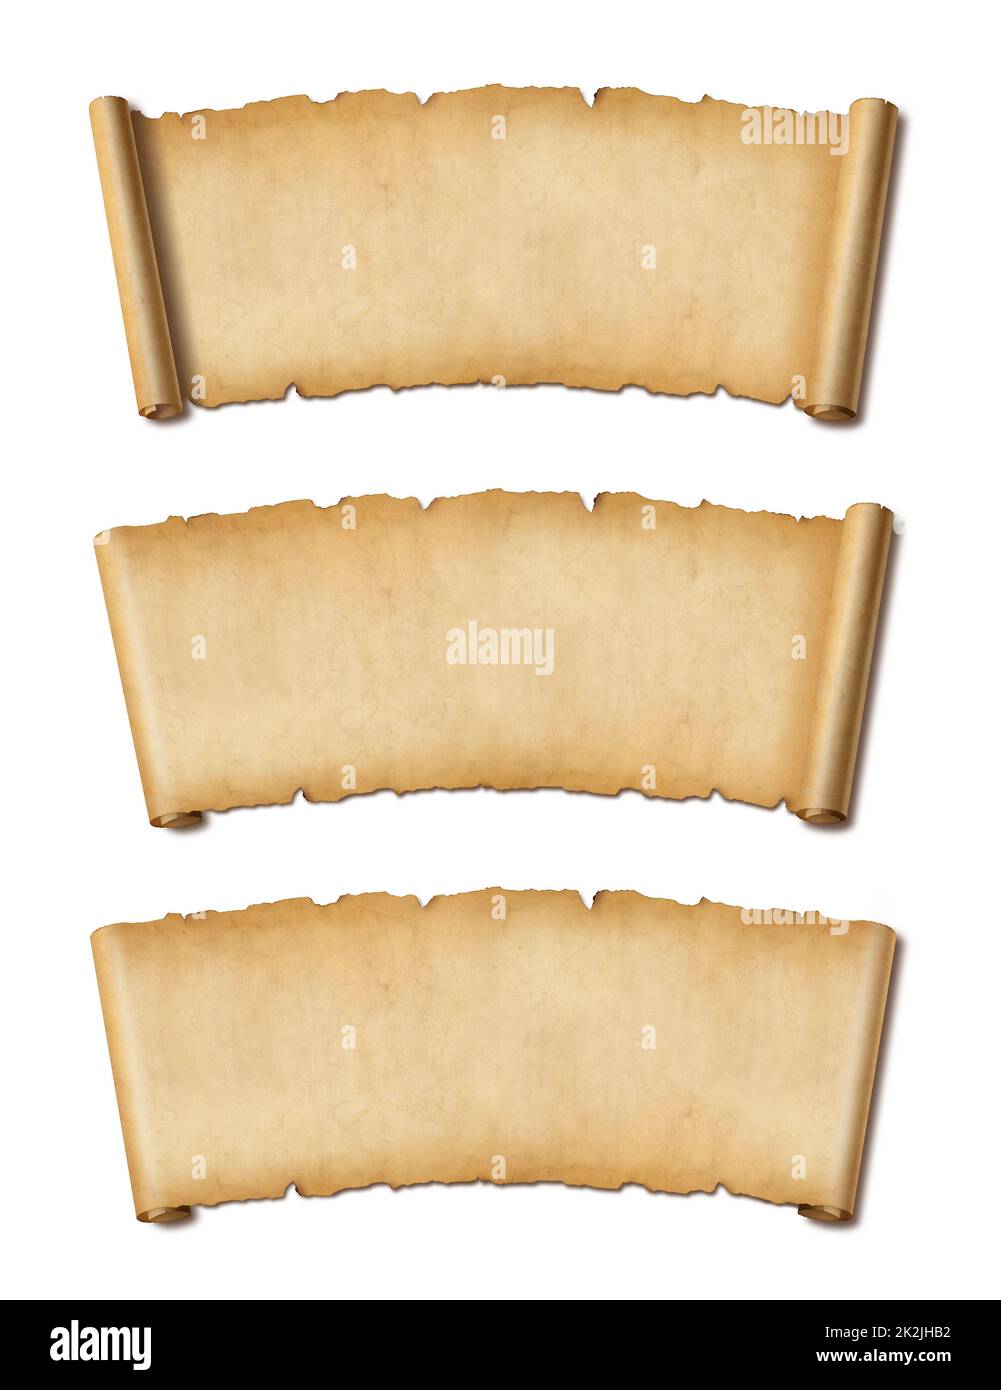 Old Parchment paper scroll set isolated on white with shadow. Horizontal banners Stock Photo